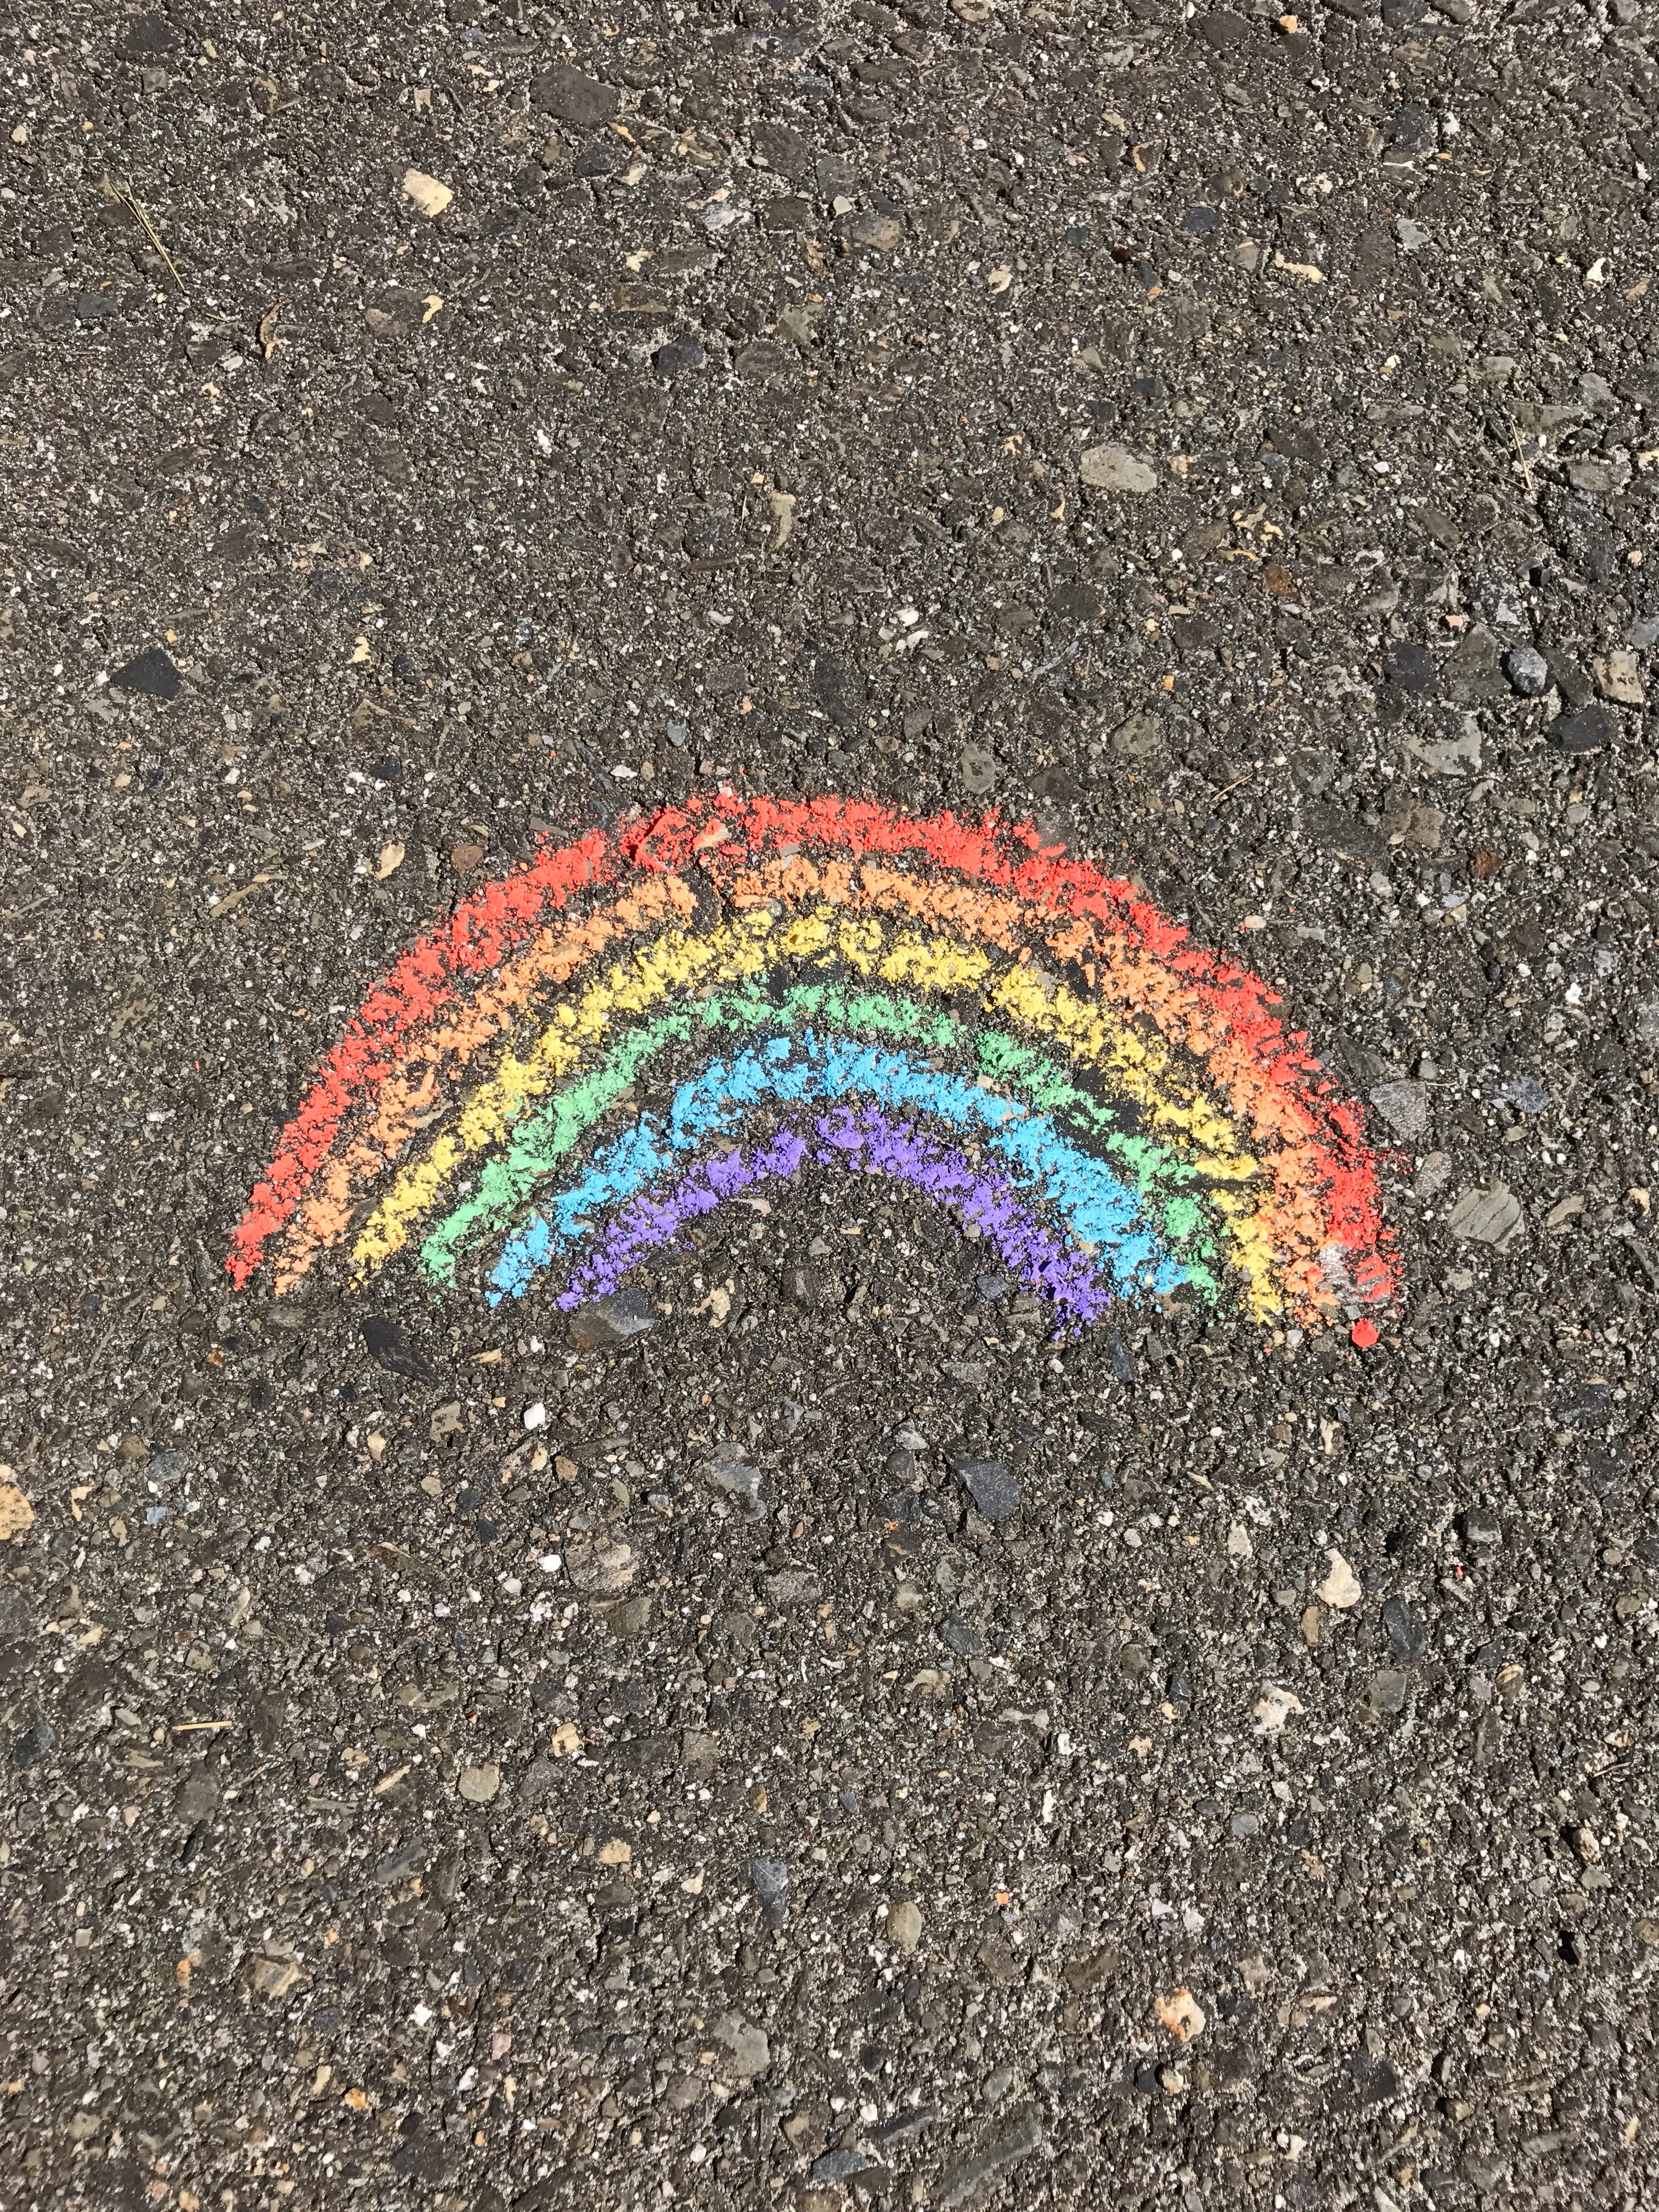 A simple chalk drawing of a rainbow on pavement